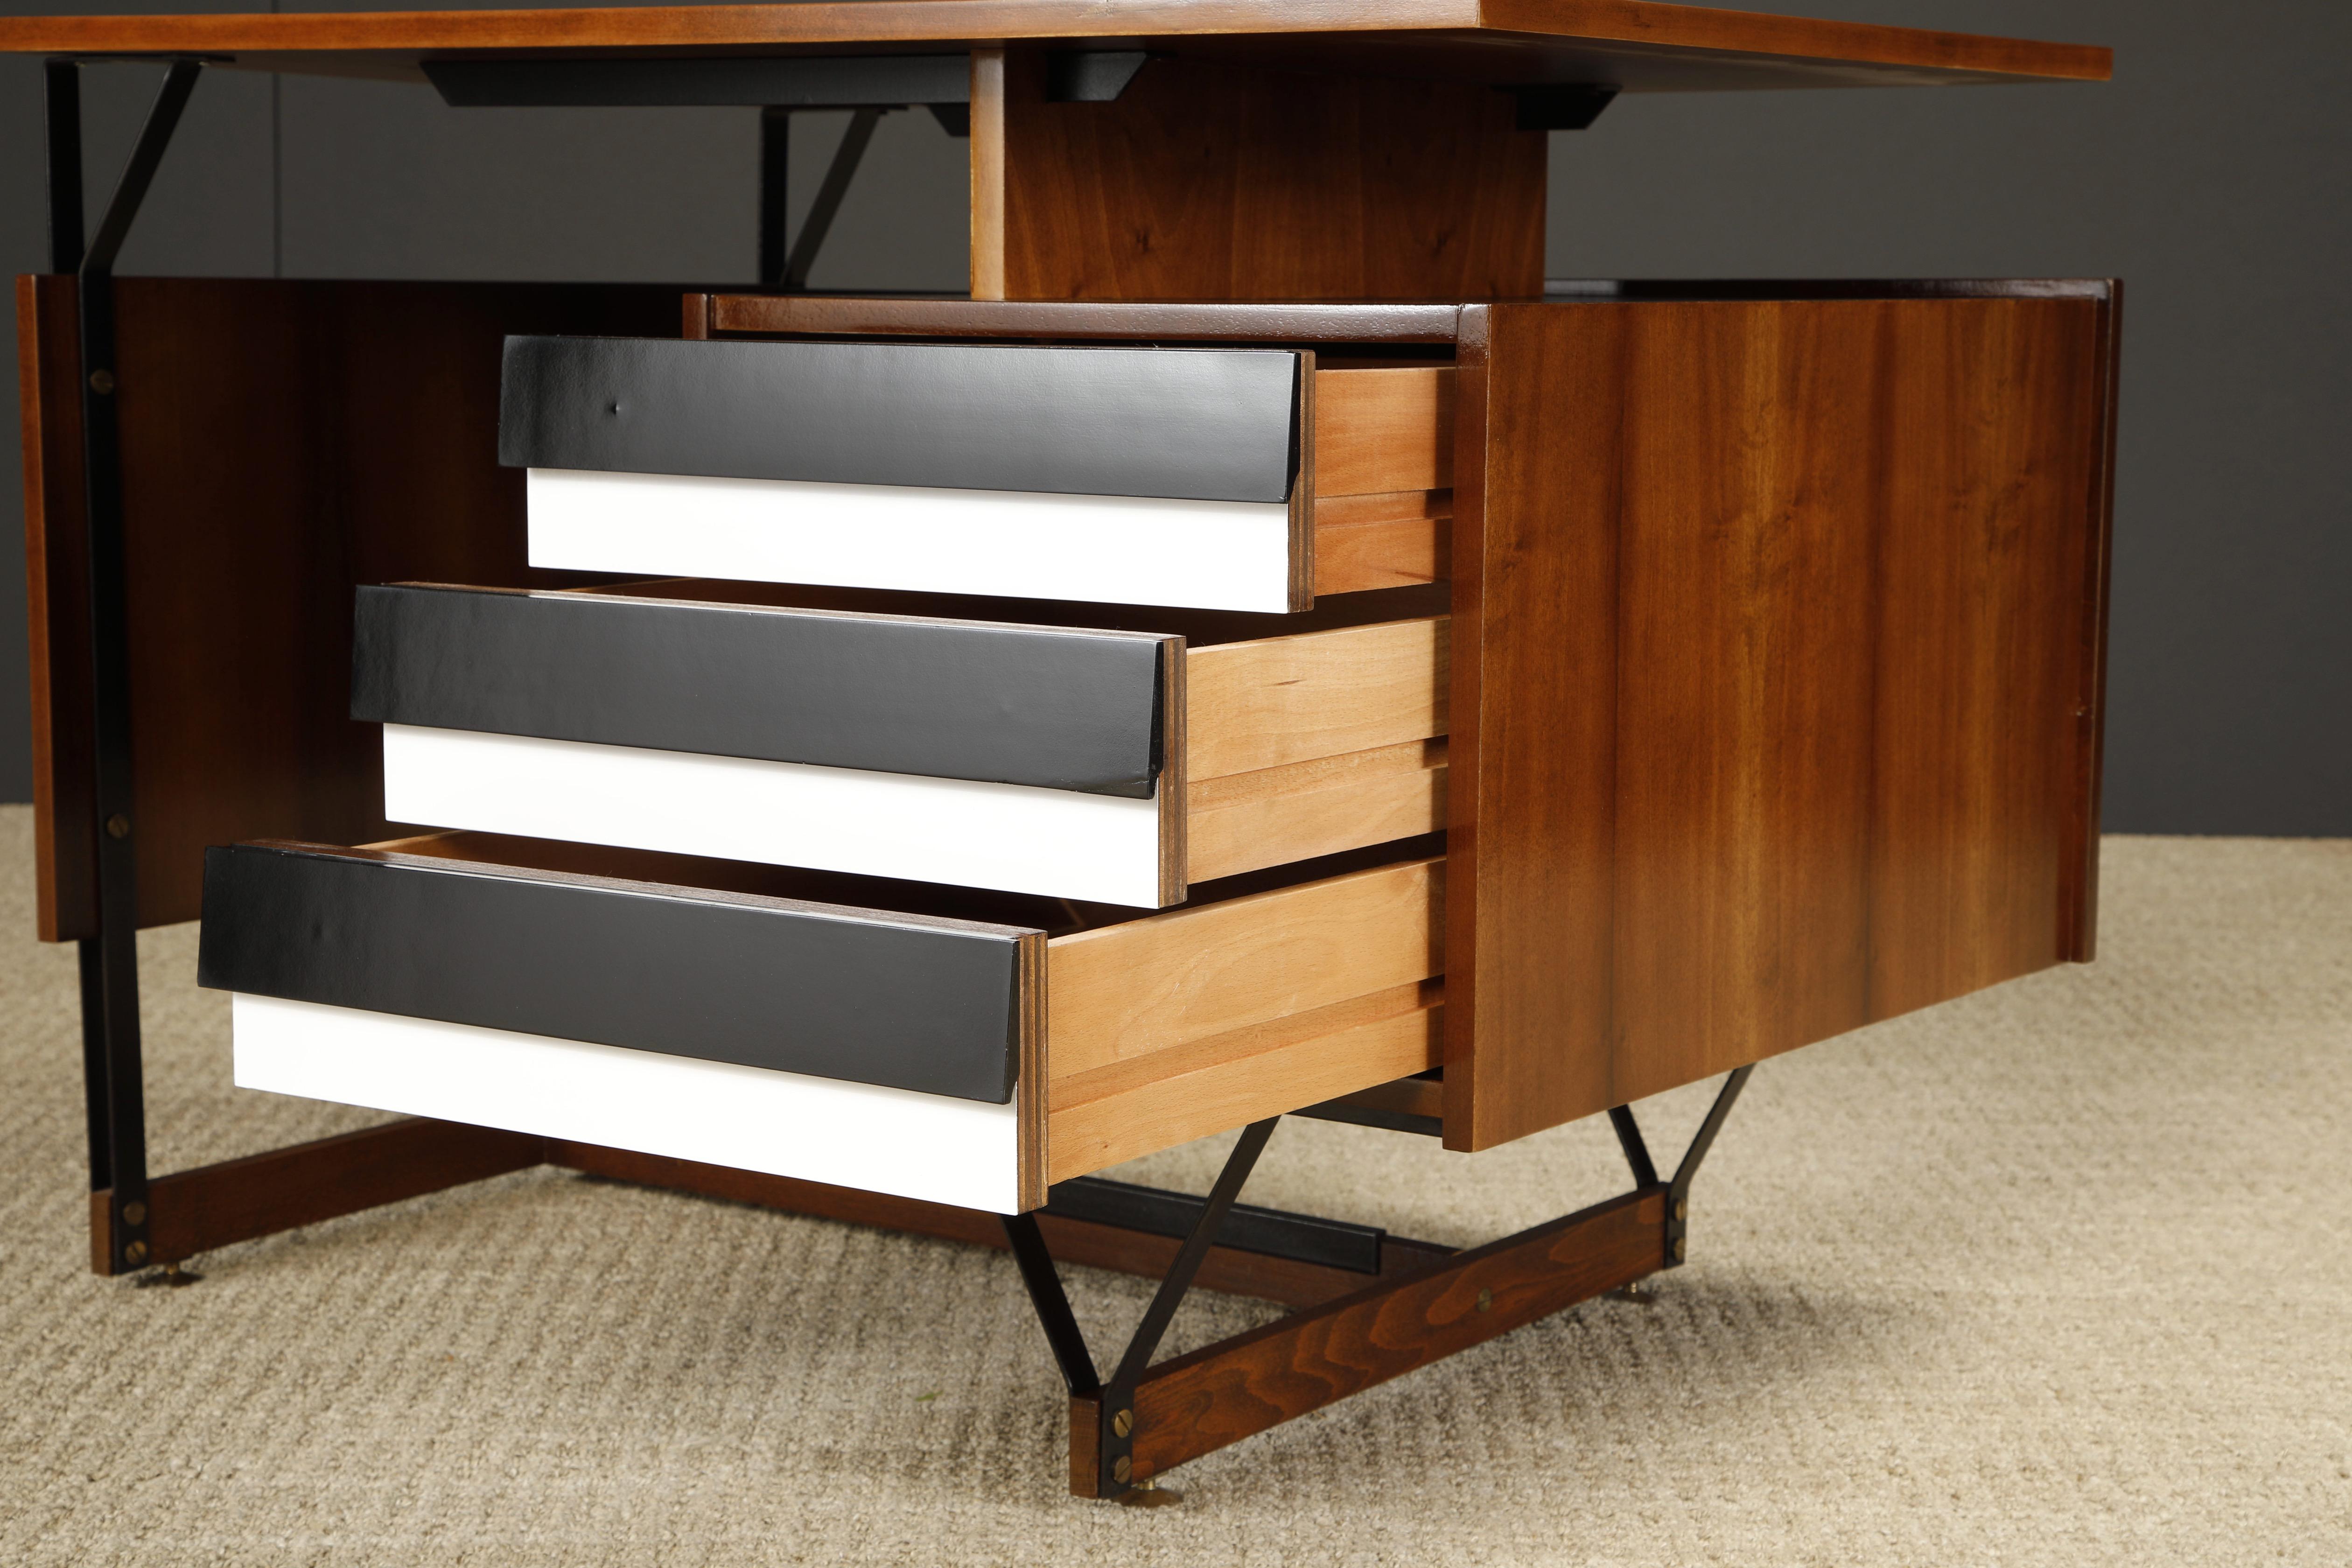 Italian Mid-Century Modern Desk, Style of Gio Ponti, c 1950s, Refinished For Sale 15